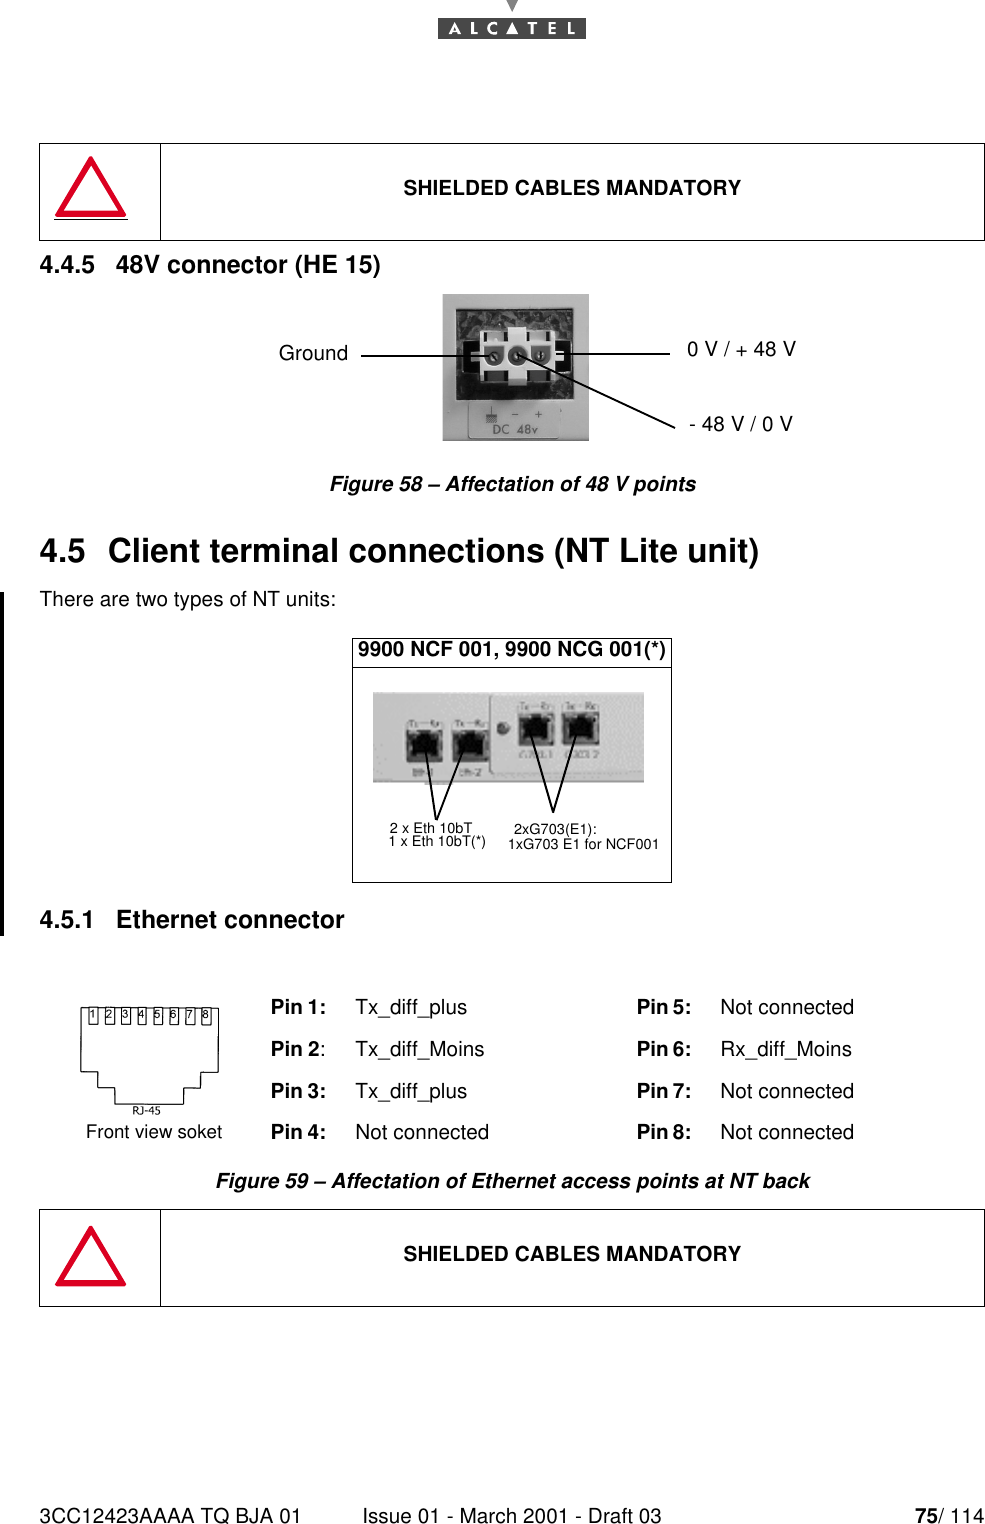 3CC12423AAAA TQ BJA 01 Issue 01 - March 2001 - Draft 03 75/ 114784.4.5   48V connector (HE 15)Figure 58 – Affectation of 48 V points4.5  Client terminal connections (NT Lite unit)There are two types of NT units:4.5.1   Ethernet connectorFigure 59 – Affectation of Ethernet access points at NT backSHIELDED CABLES MANDATORY9900 NCF 001, 9900 NCG 001(*)Pin 1: Tx_diff_plus Pin 5: Not connectedPin 2: Tx_diff_Moins Pin 6: Rx_diff_MoinsPin 3: Tx_diff_plus Pin 7: Not connectedPin 4:  Not connected Pin 8: Not connectedSHIELDED CABLES MANDATORYGround  0 V / + 48 V- 48 V / 0 V2 x Eth 10bT 2xG703(E1):1 x Eth 10bT(*) 1xG703 E1 for NCF001Front view soket